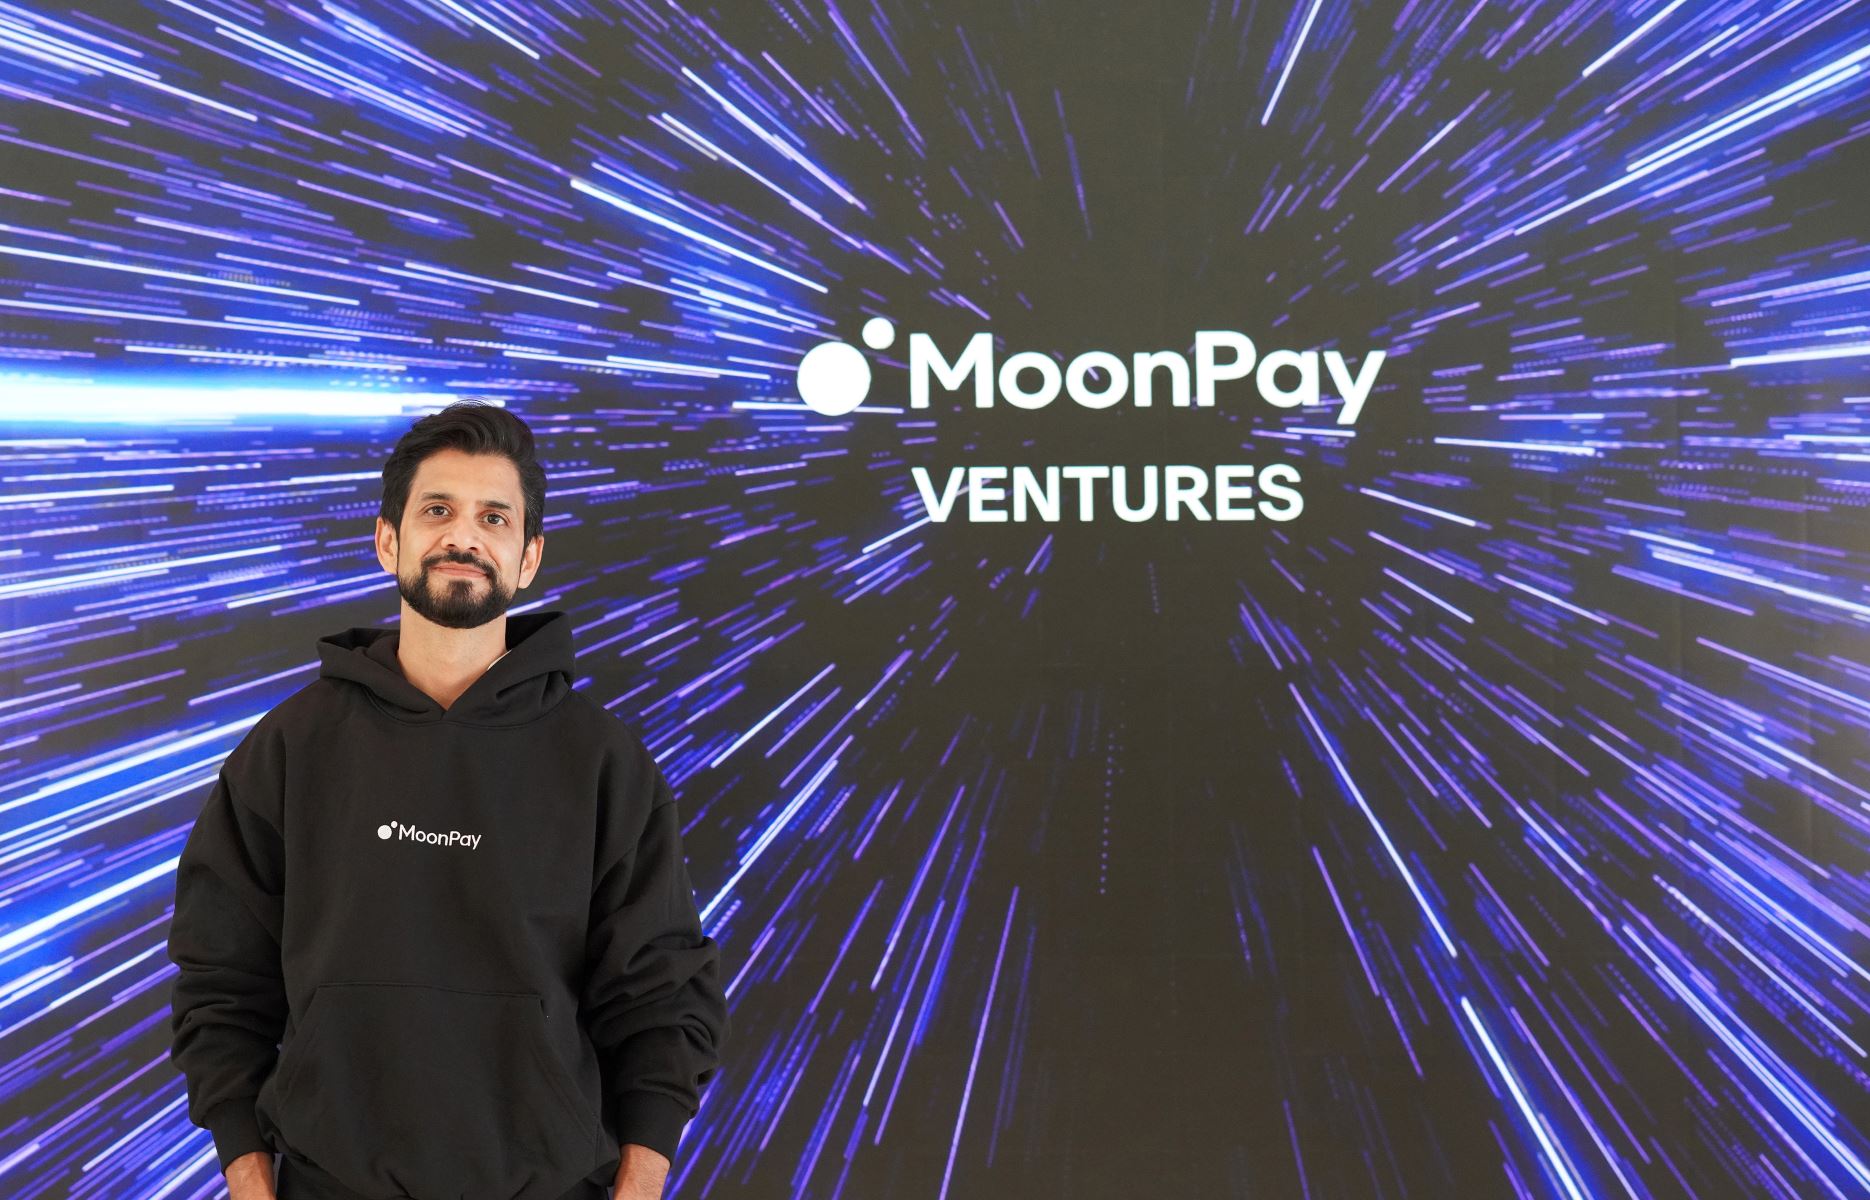 MoonPay Launches MoonPay Ventures To Fuel Web3 Infra, Gaming, And Fintech Startups